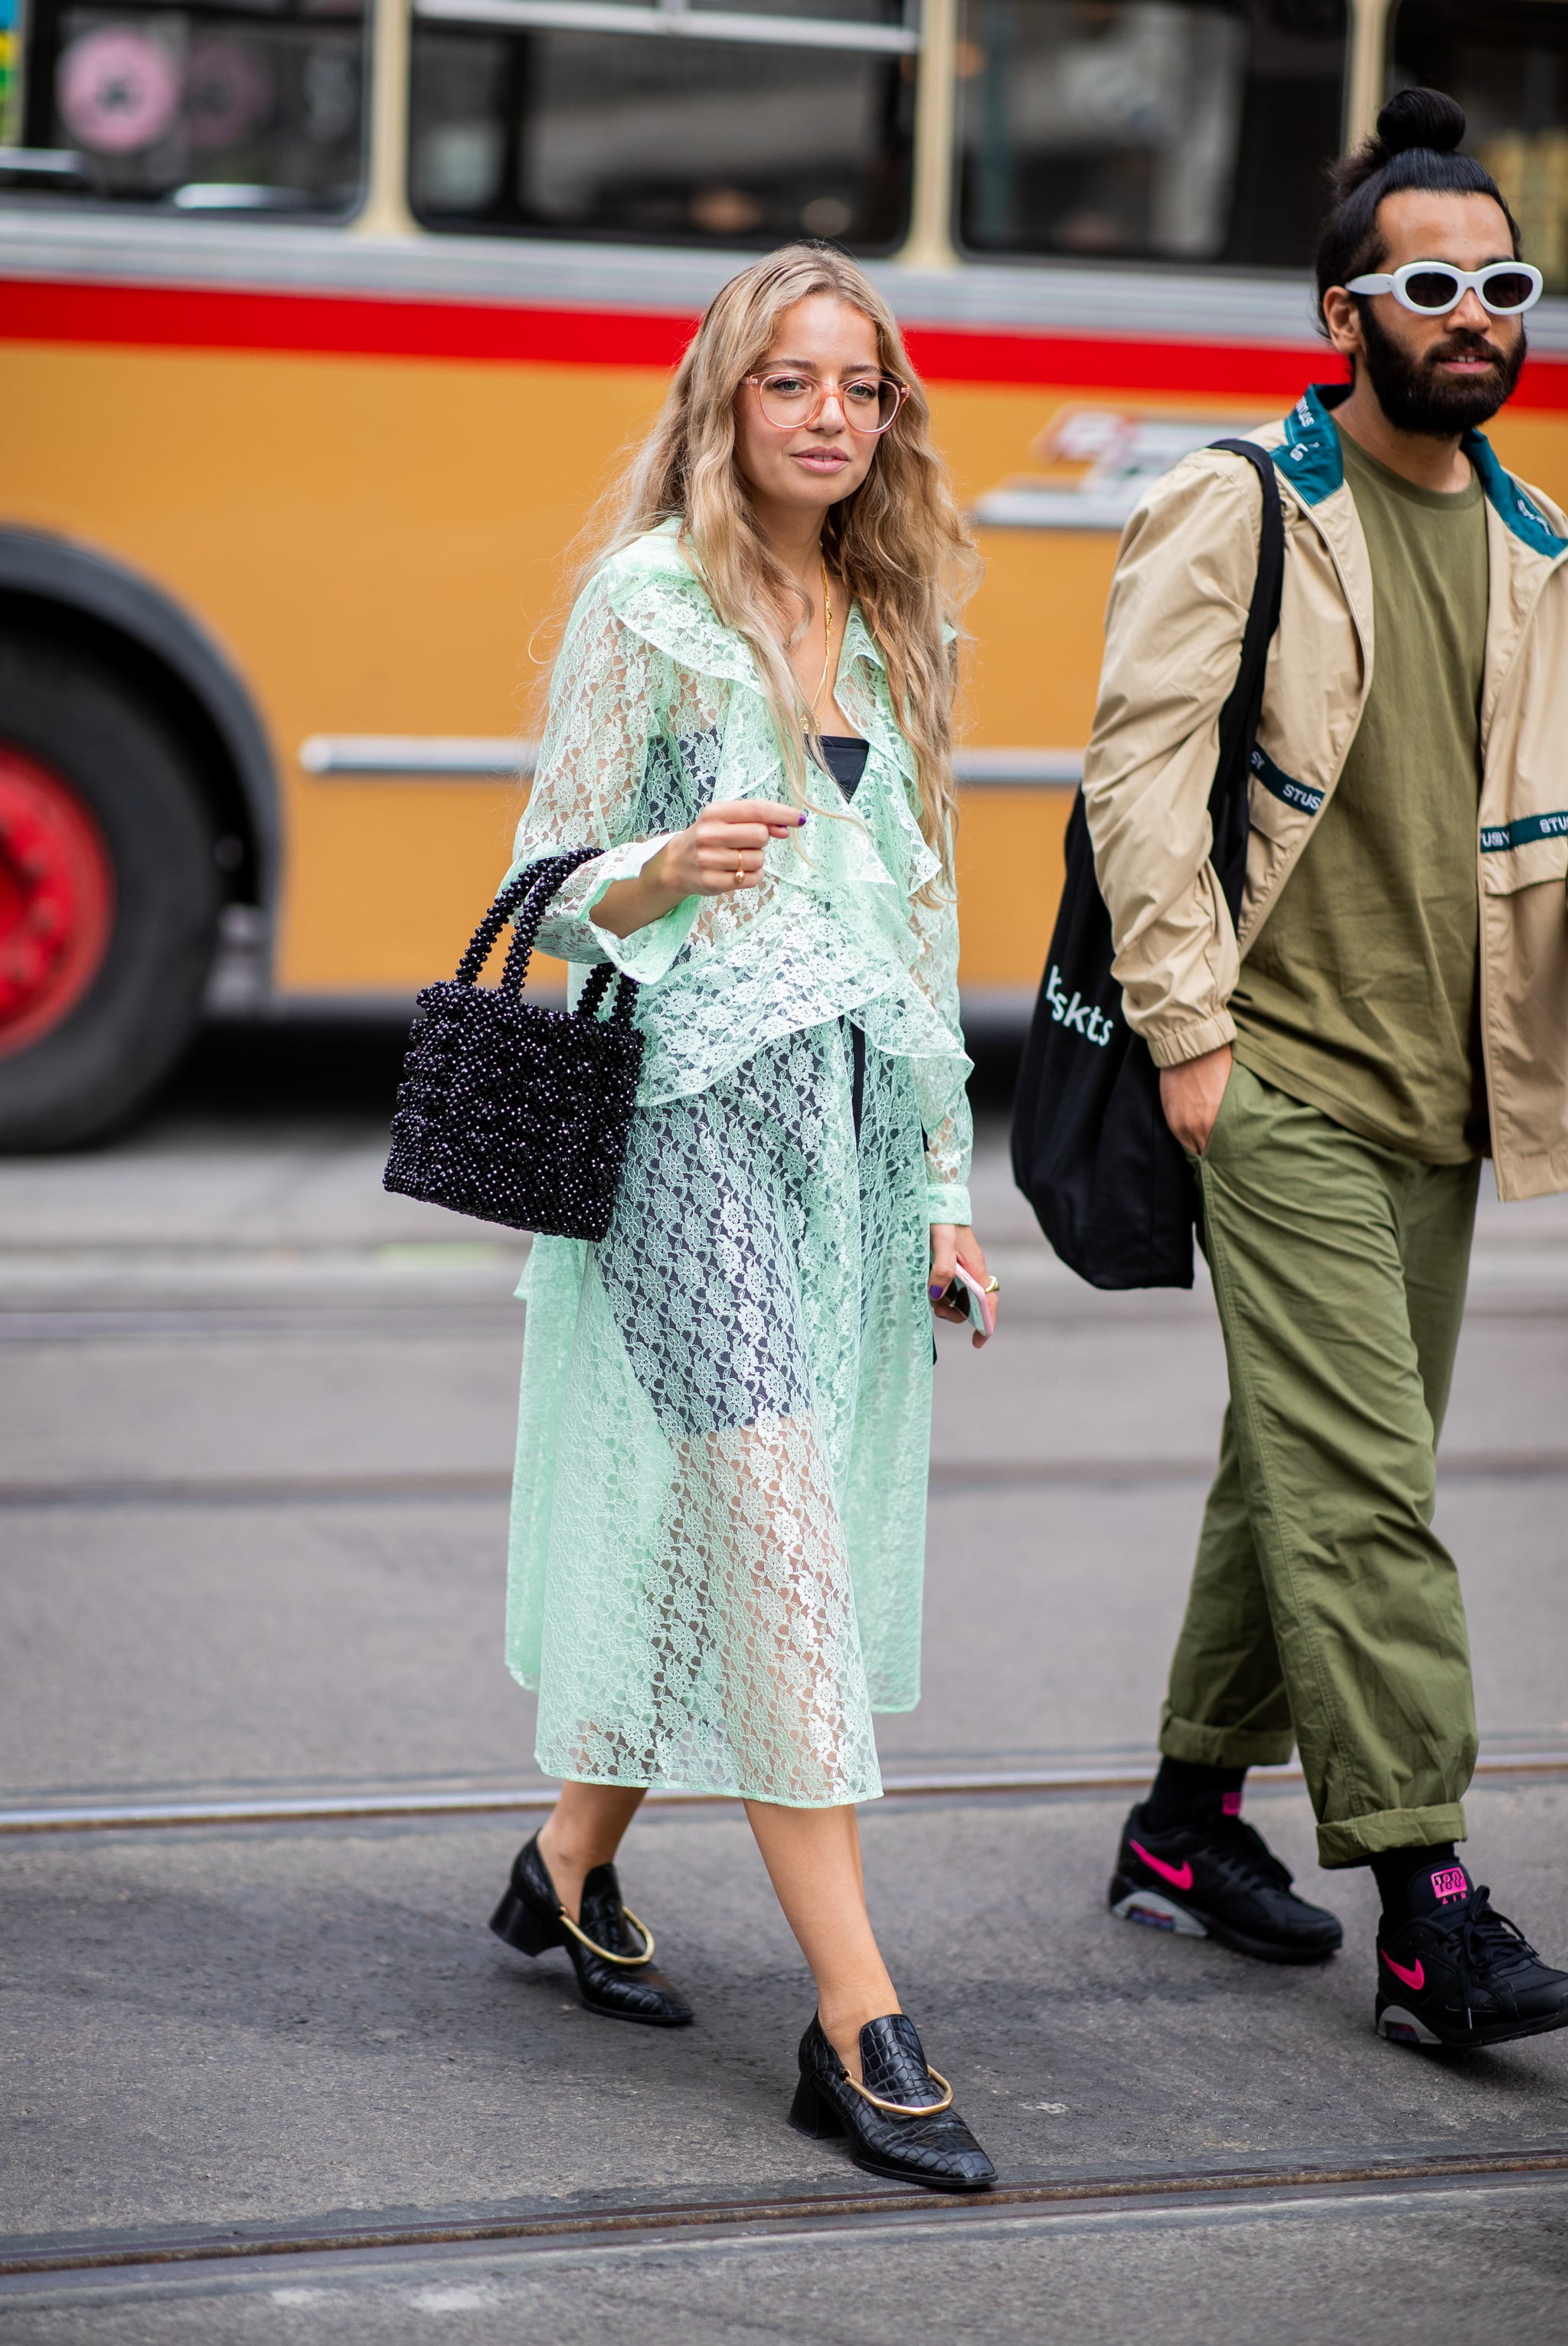 Styling a sheer mint-green dress with a bodysuit underneath., This Is by  Far the Riskiest Outfit We've Seen at Fashion Week